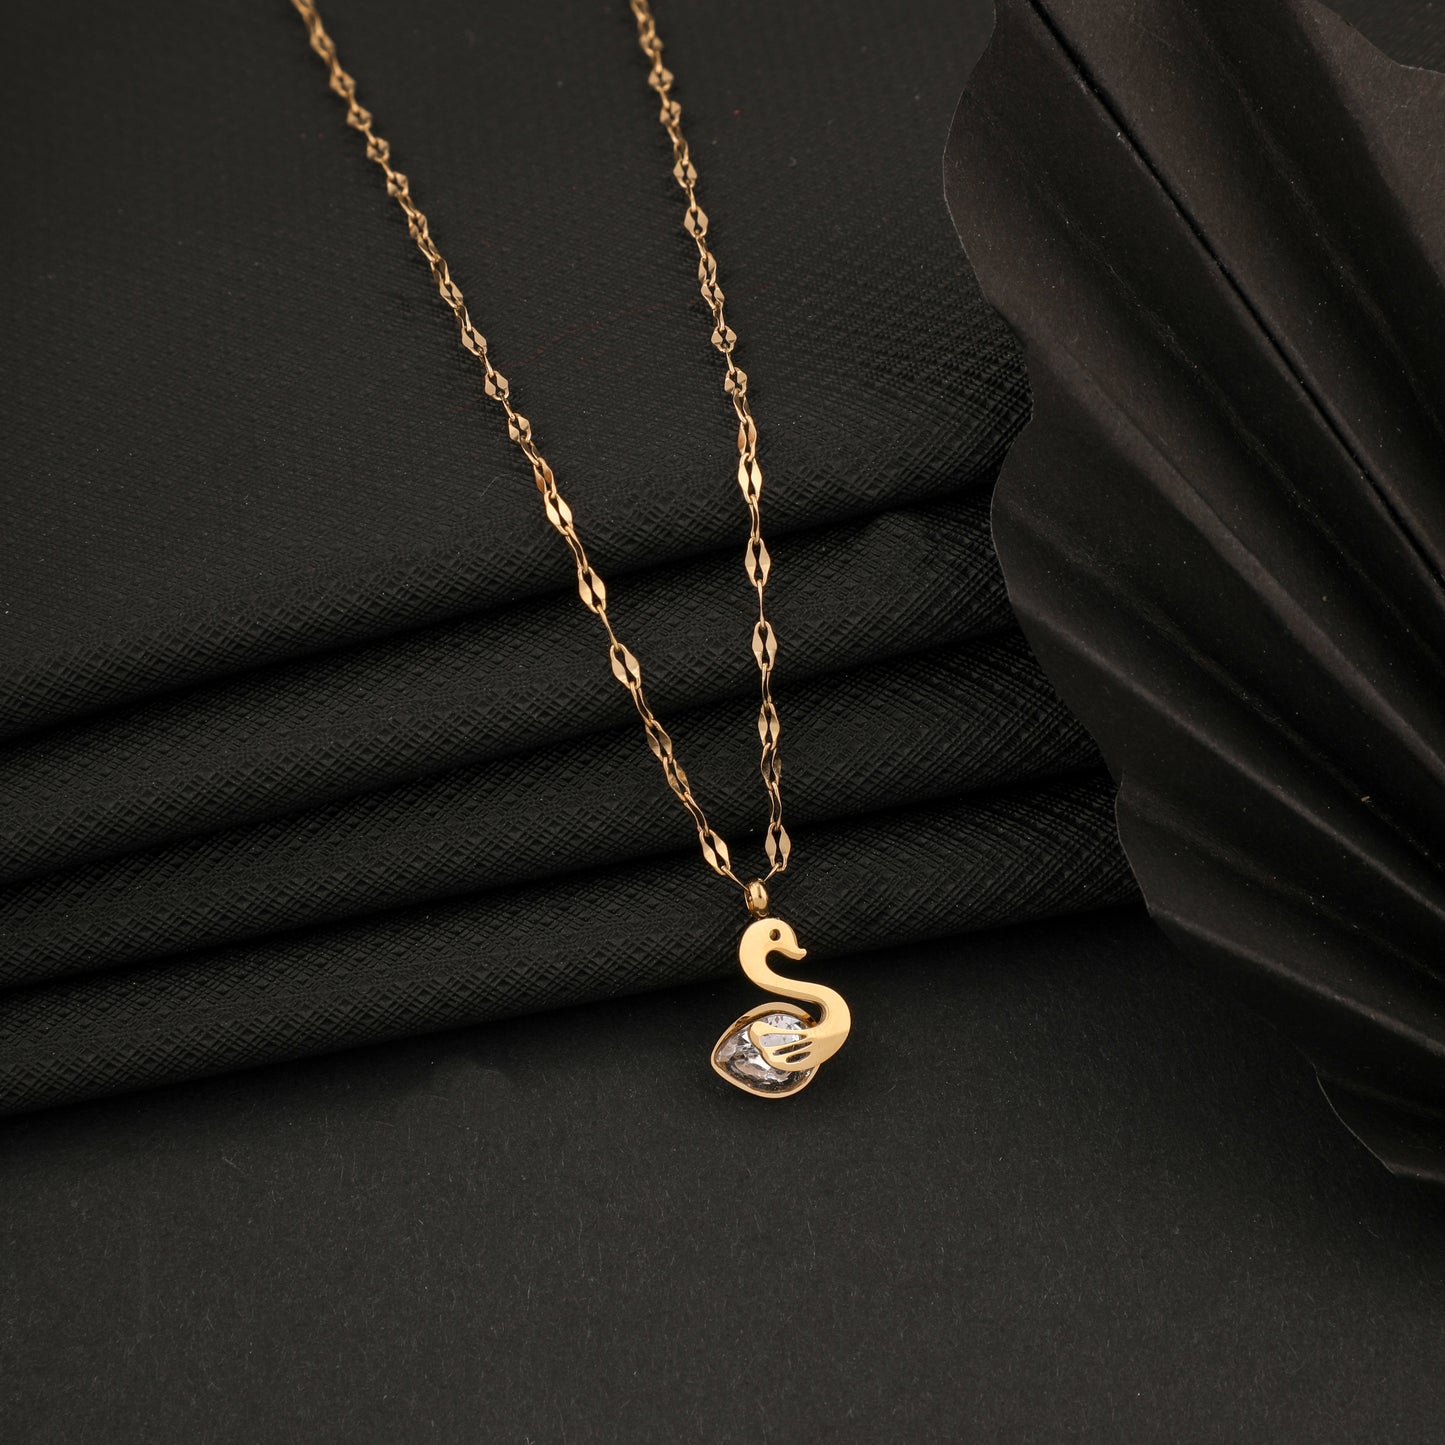 GOOSE GOLD NECKLACE